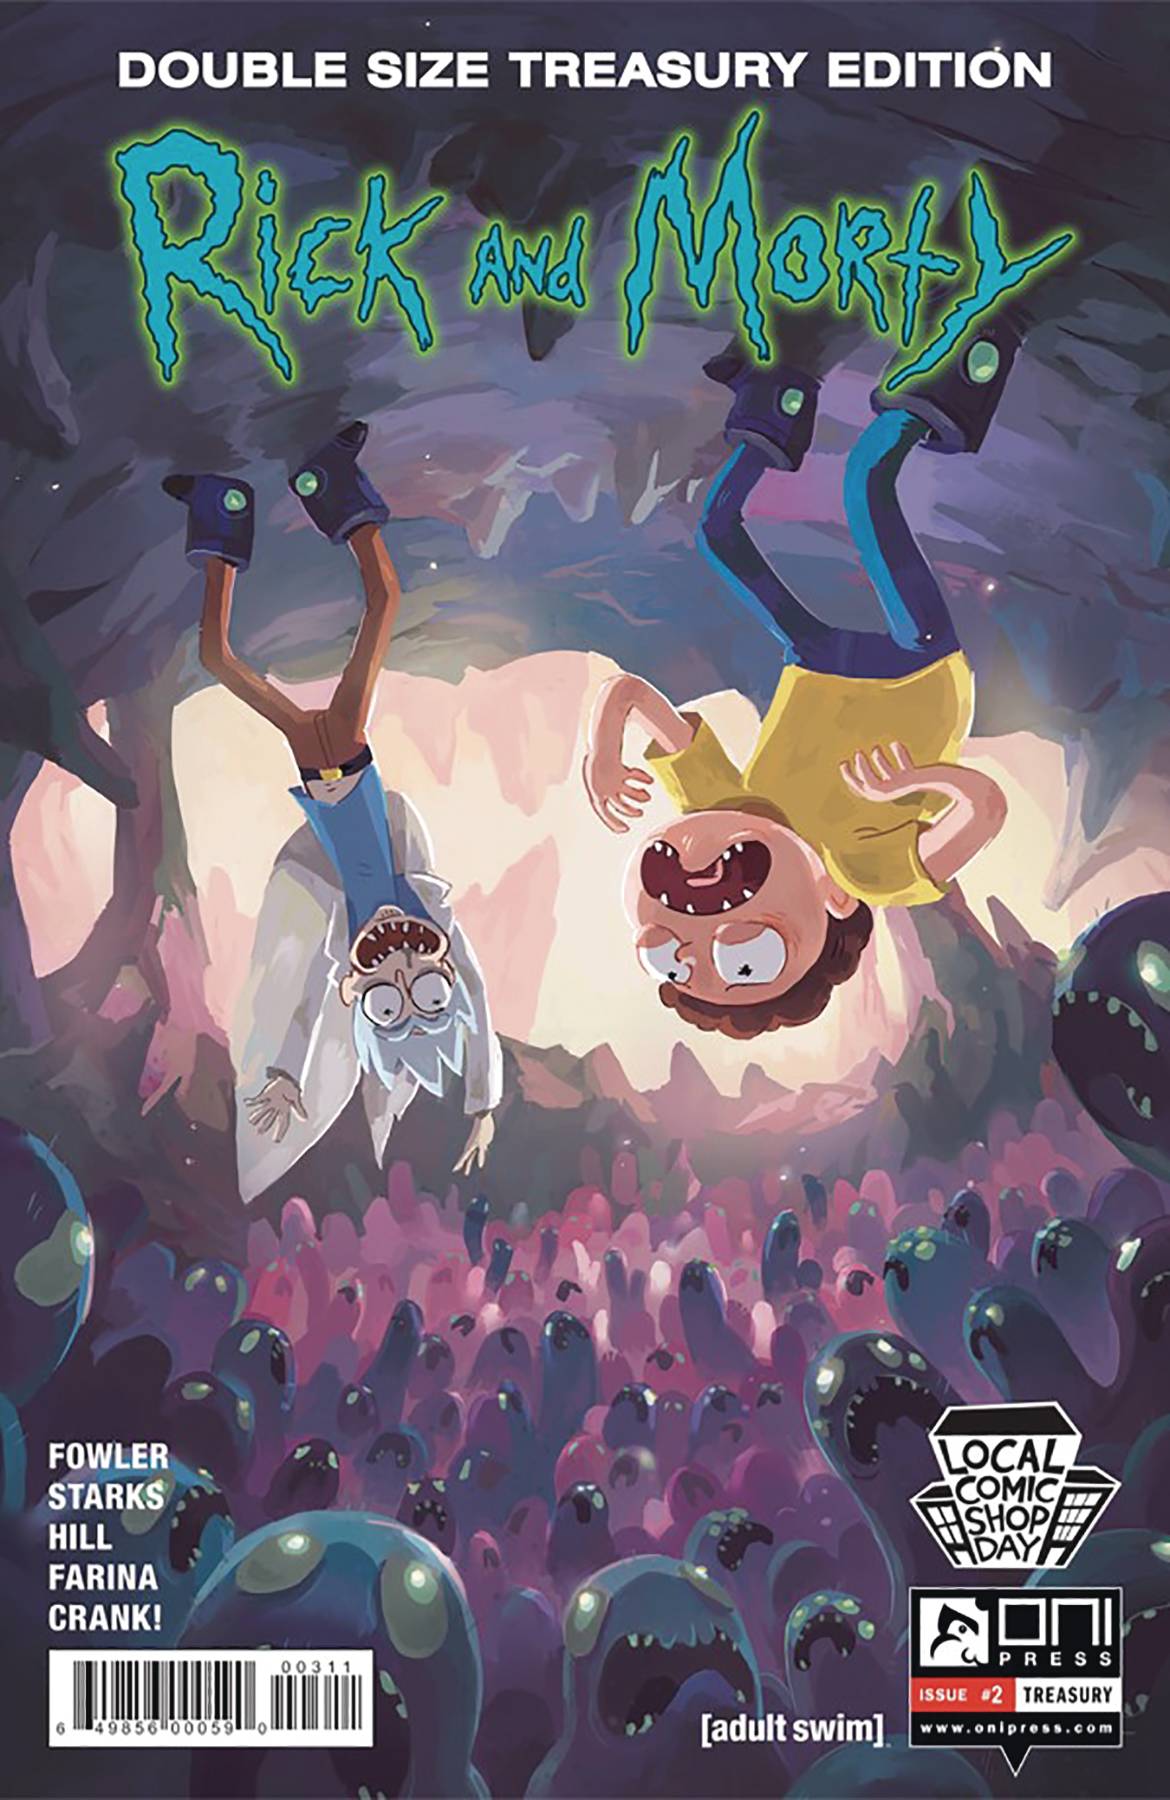 Local Comic Shop Day 2016 Rick and Morty #2 Treasury Edition (2015)